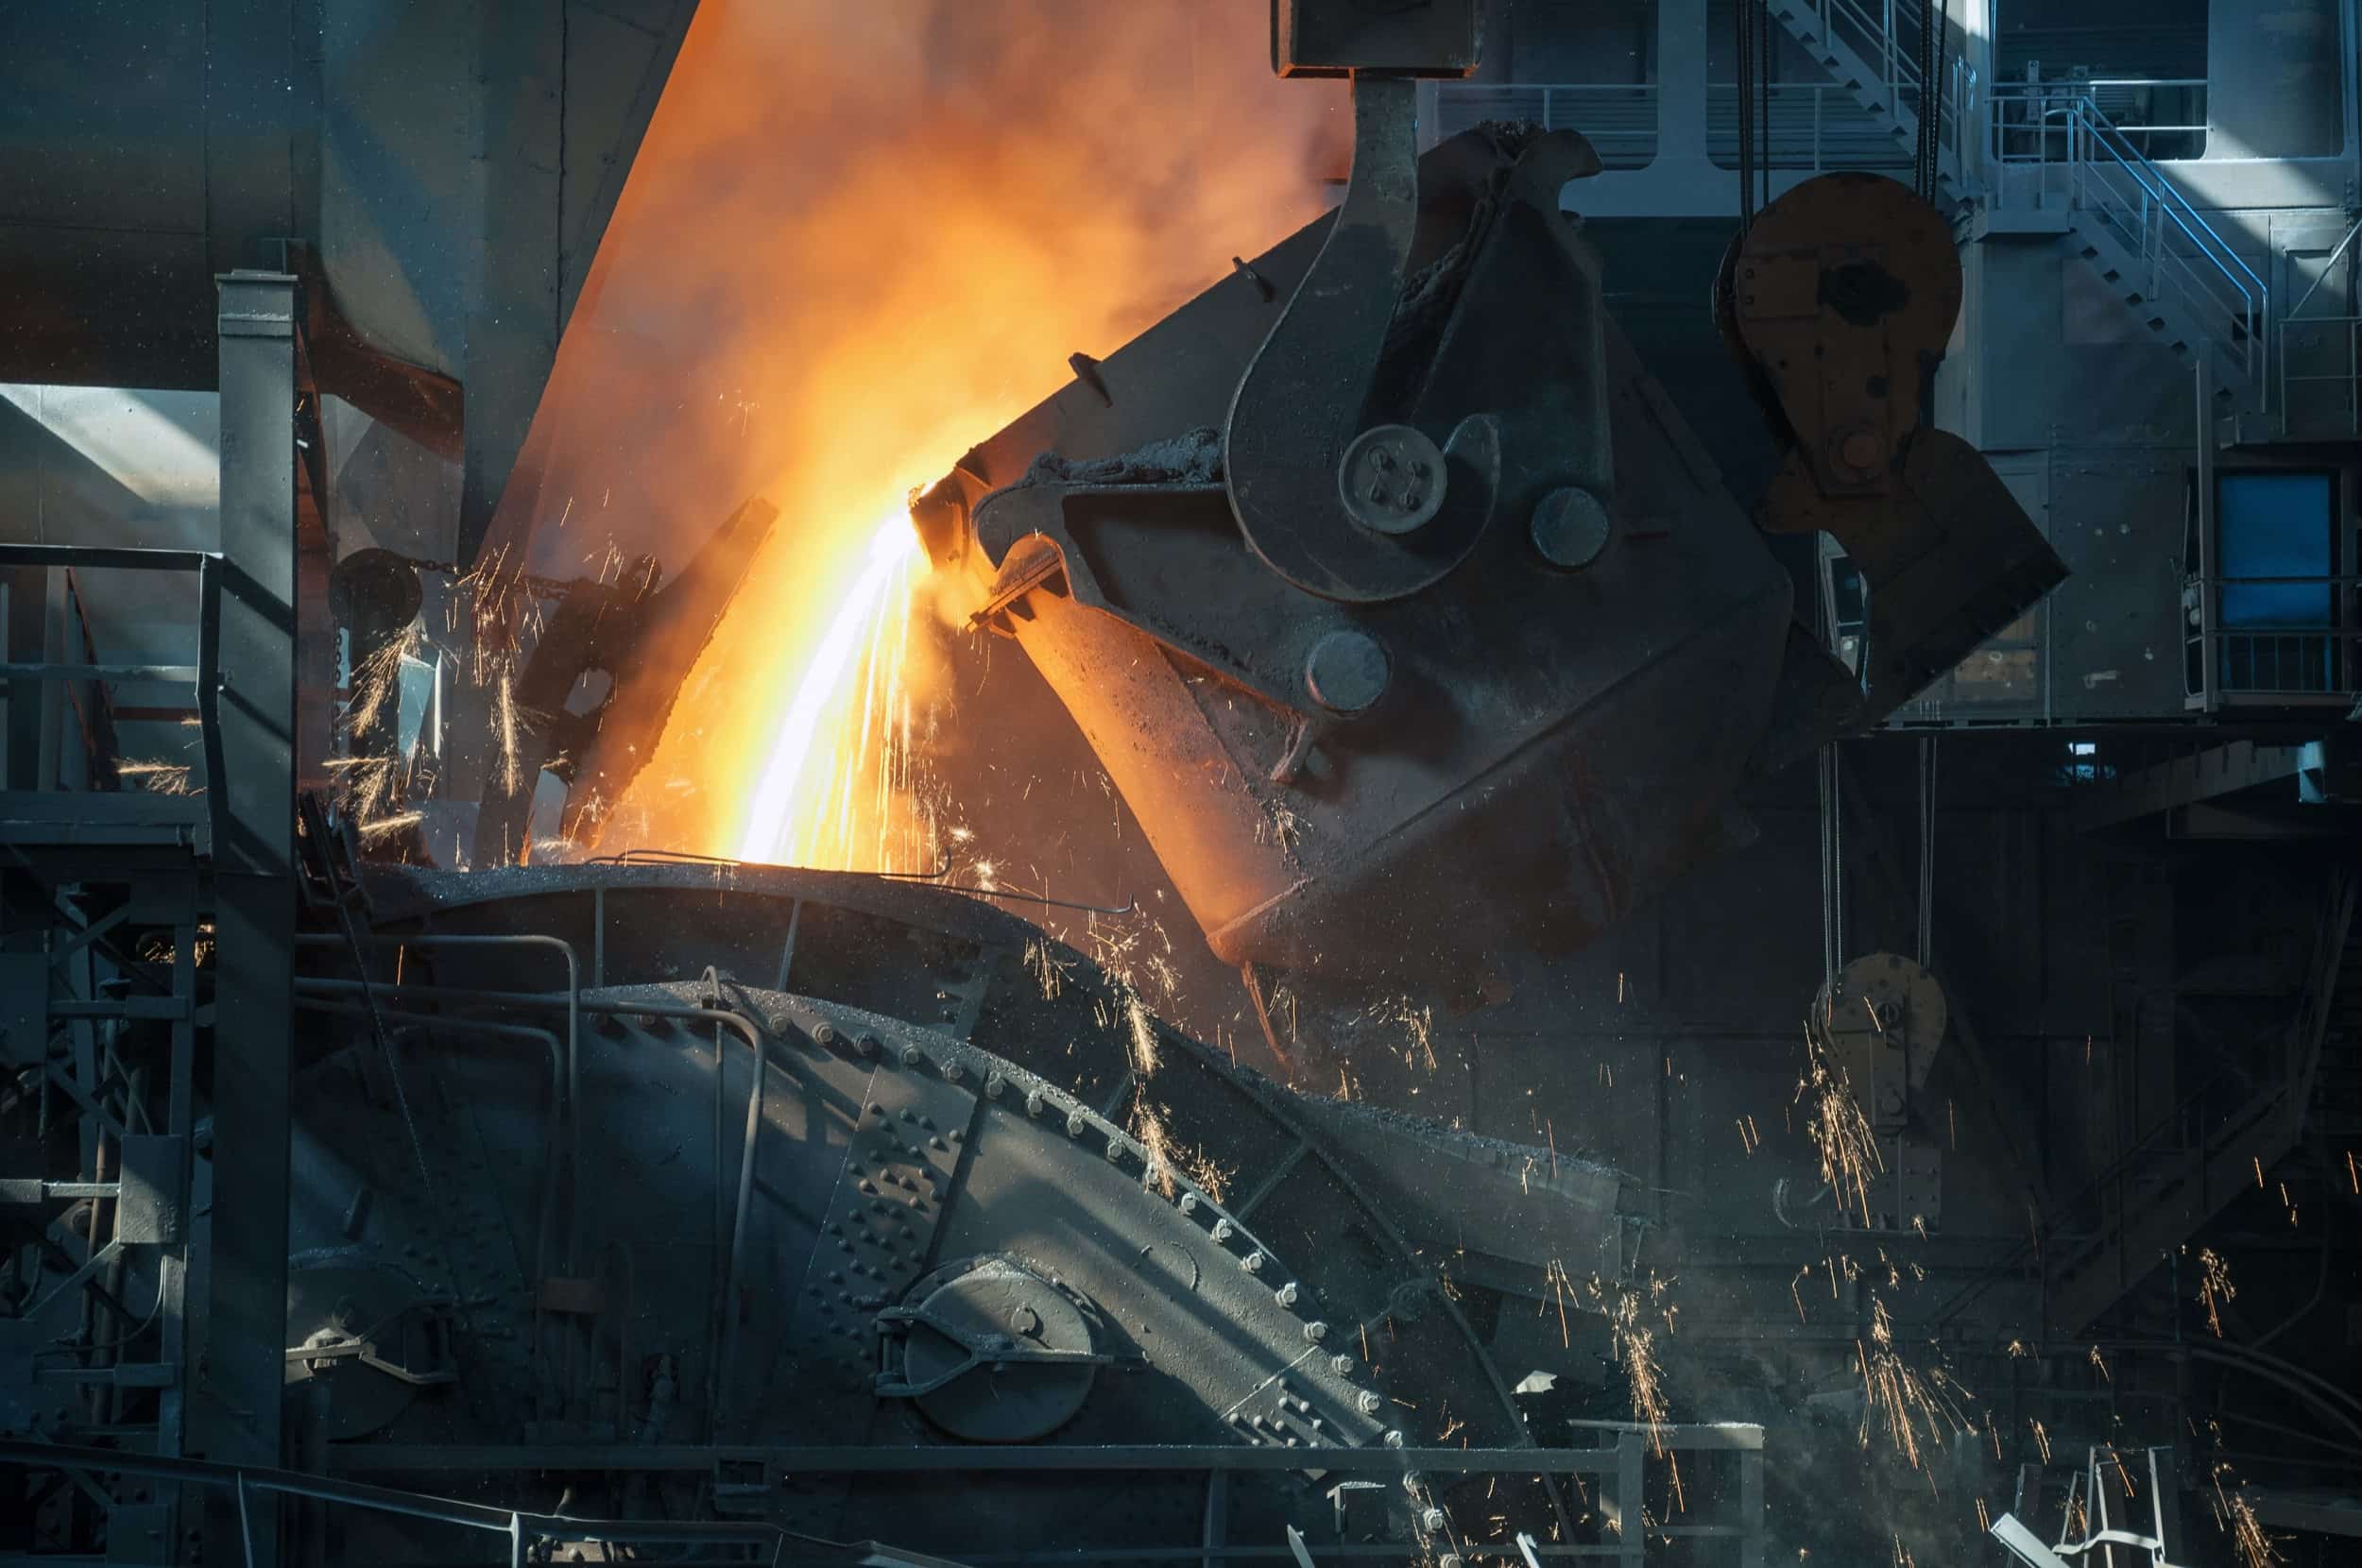 Molten metal is poured into a mould at a metal manufacturing facility.